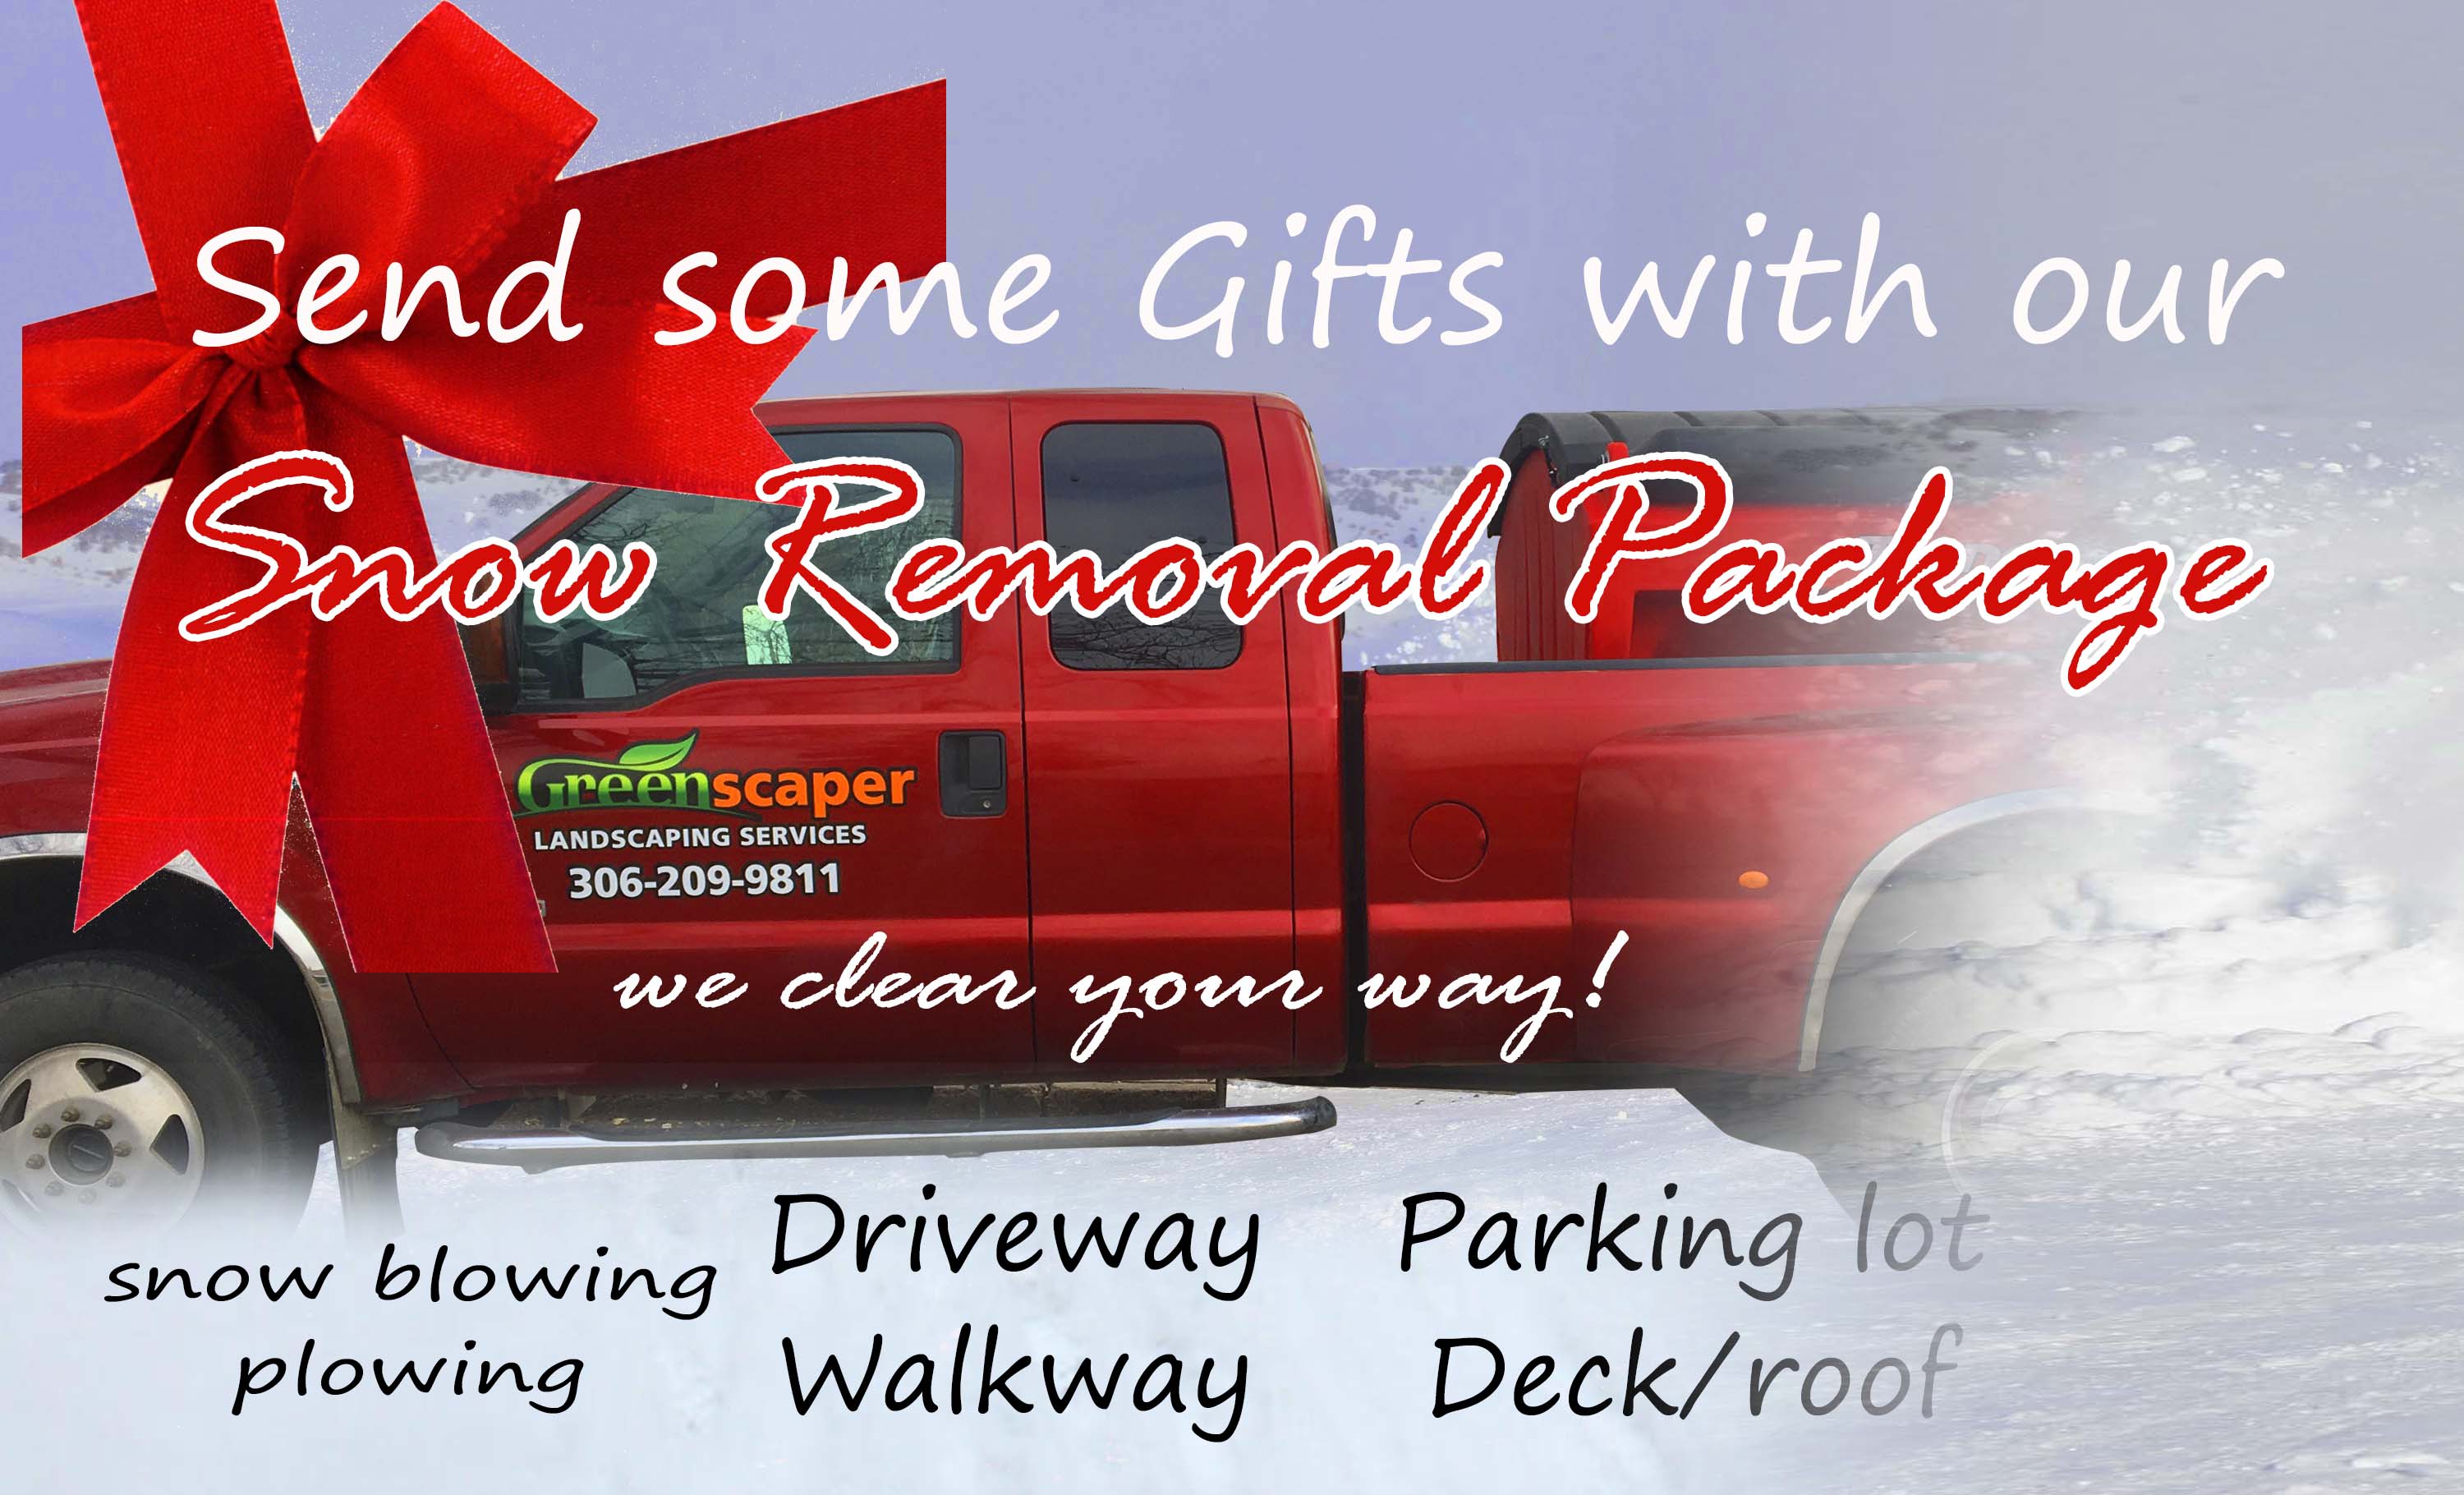 snow removal service gift package